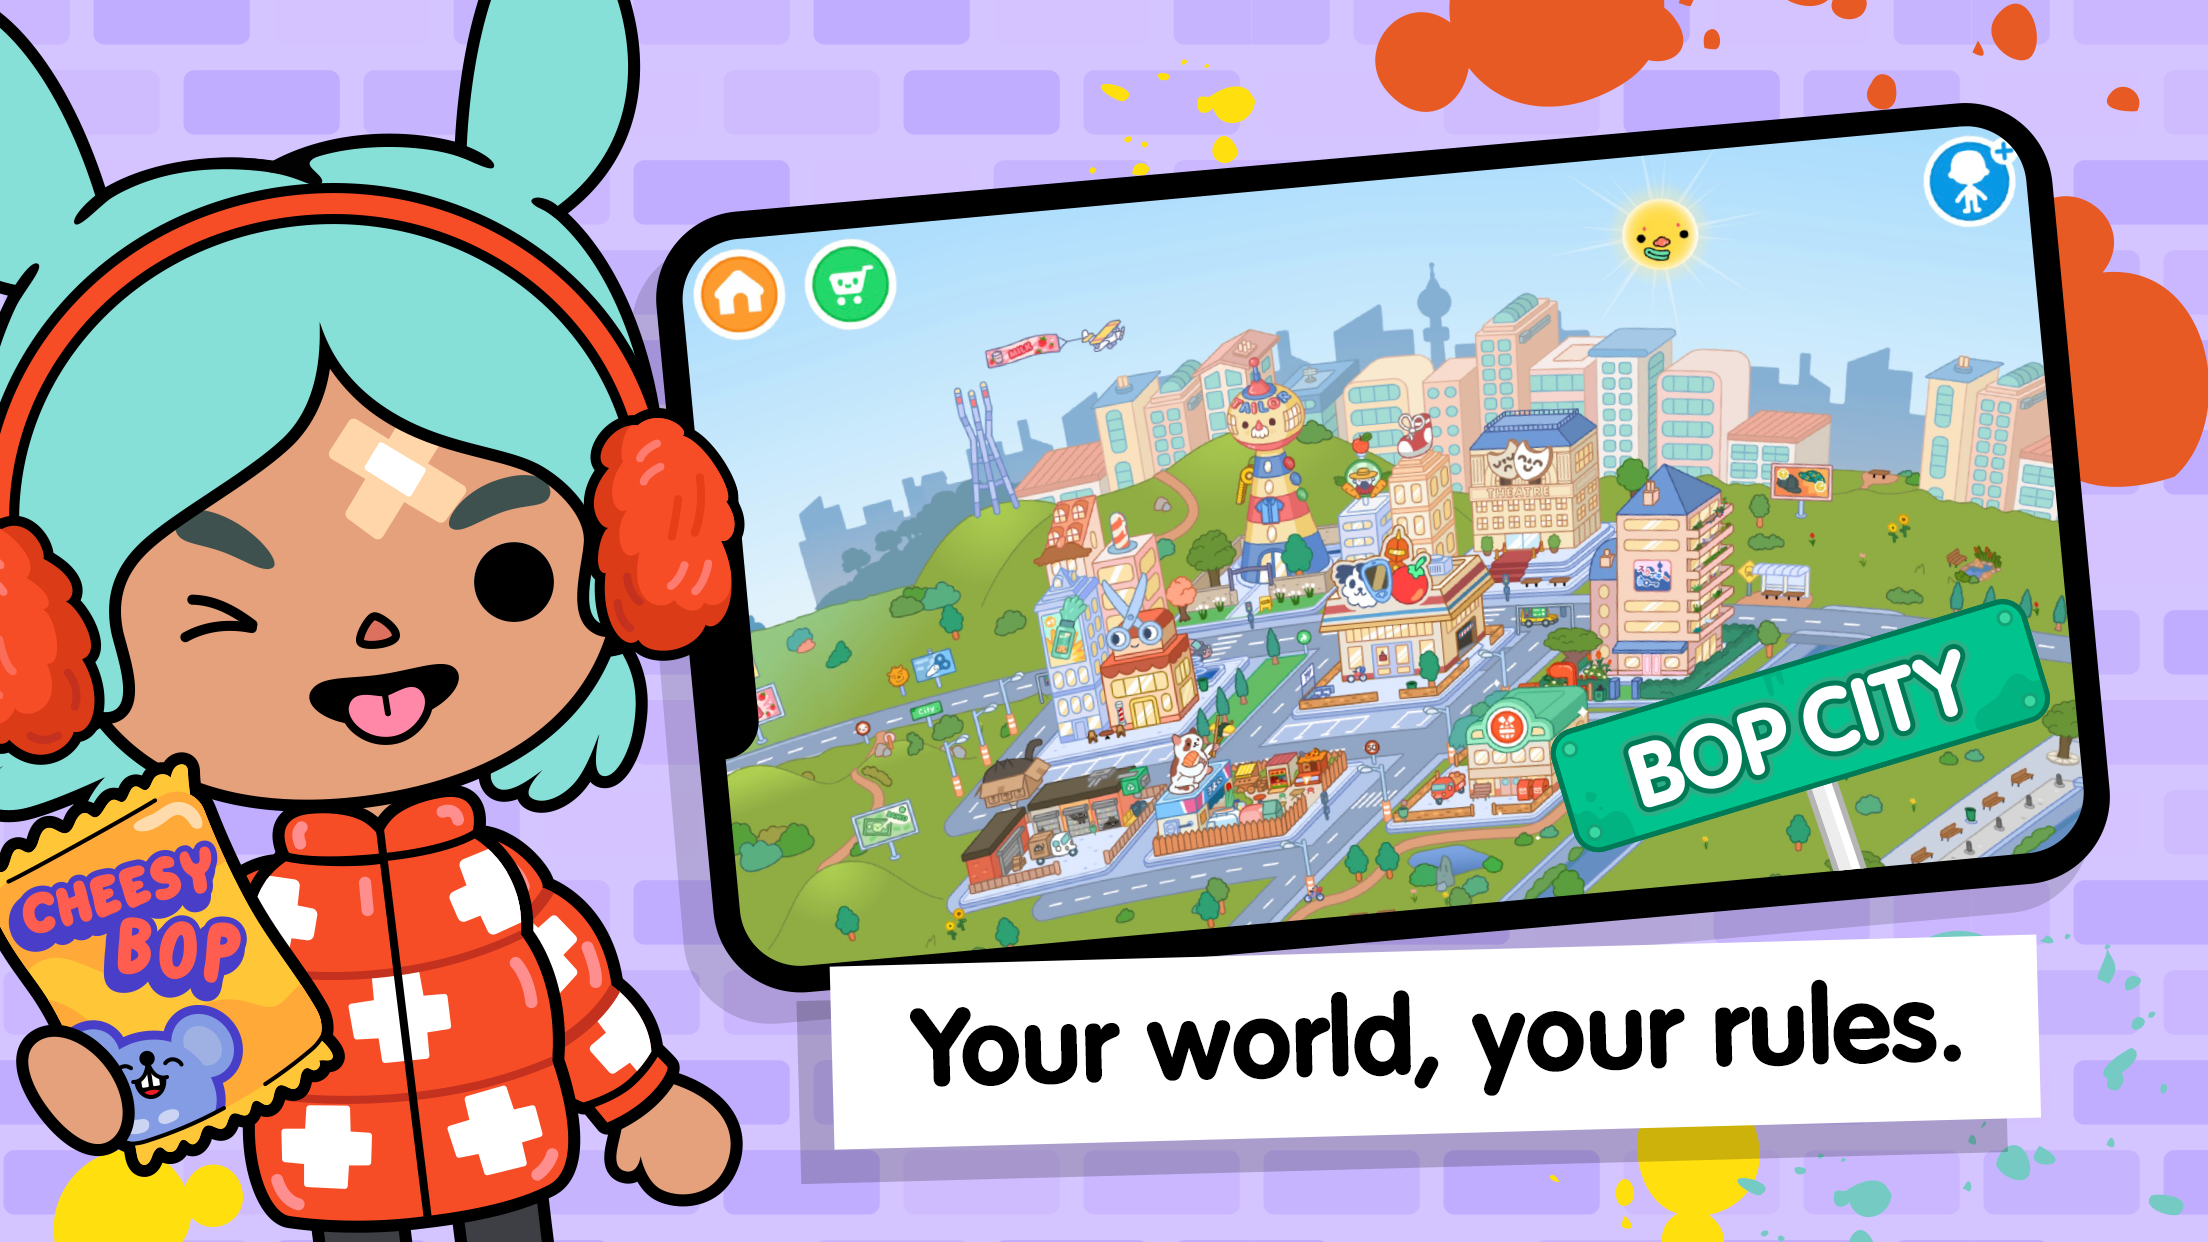 toca life world pets free walkthrough android iOS apk download for  free-TapTap